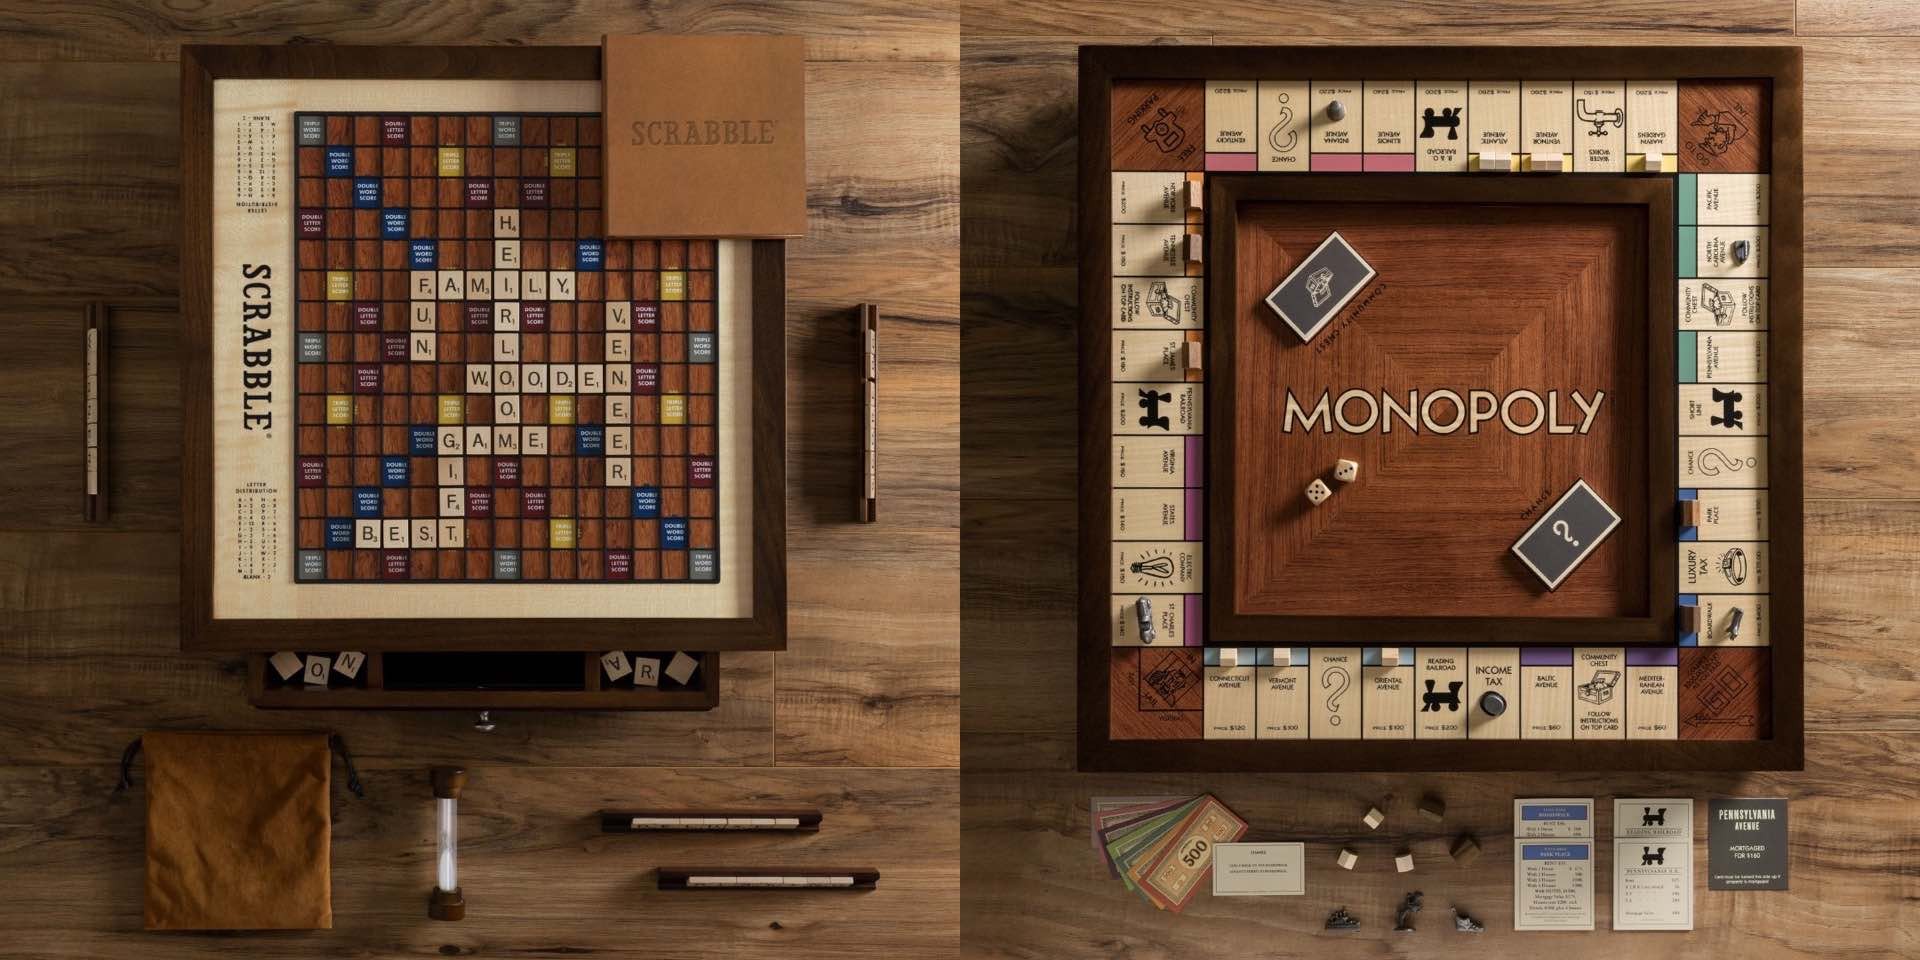 scrabble-and-monopoly-heirloom-edition-by-ws-game-company